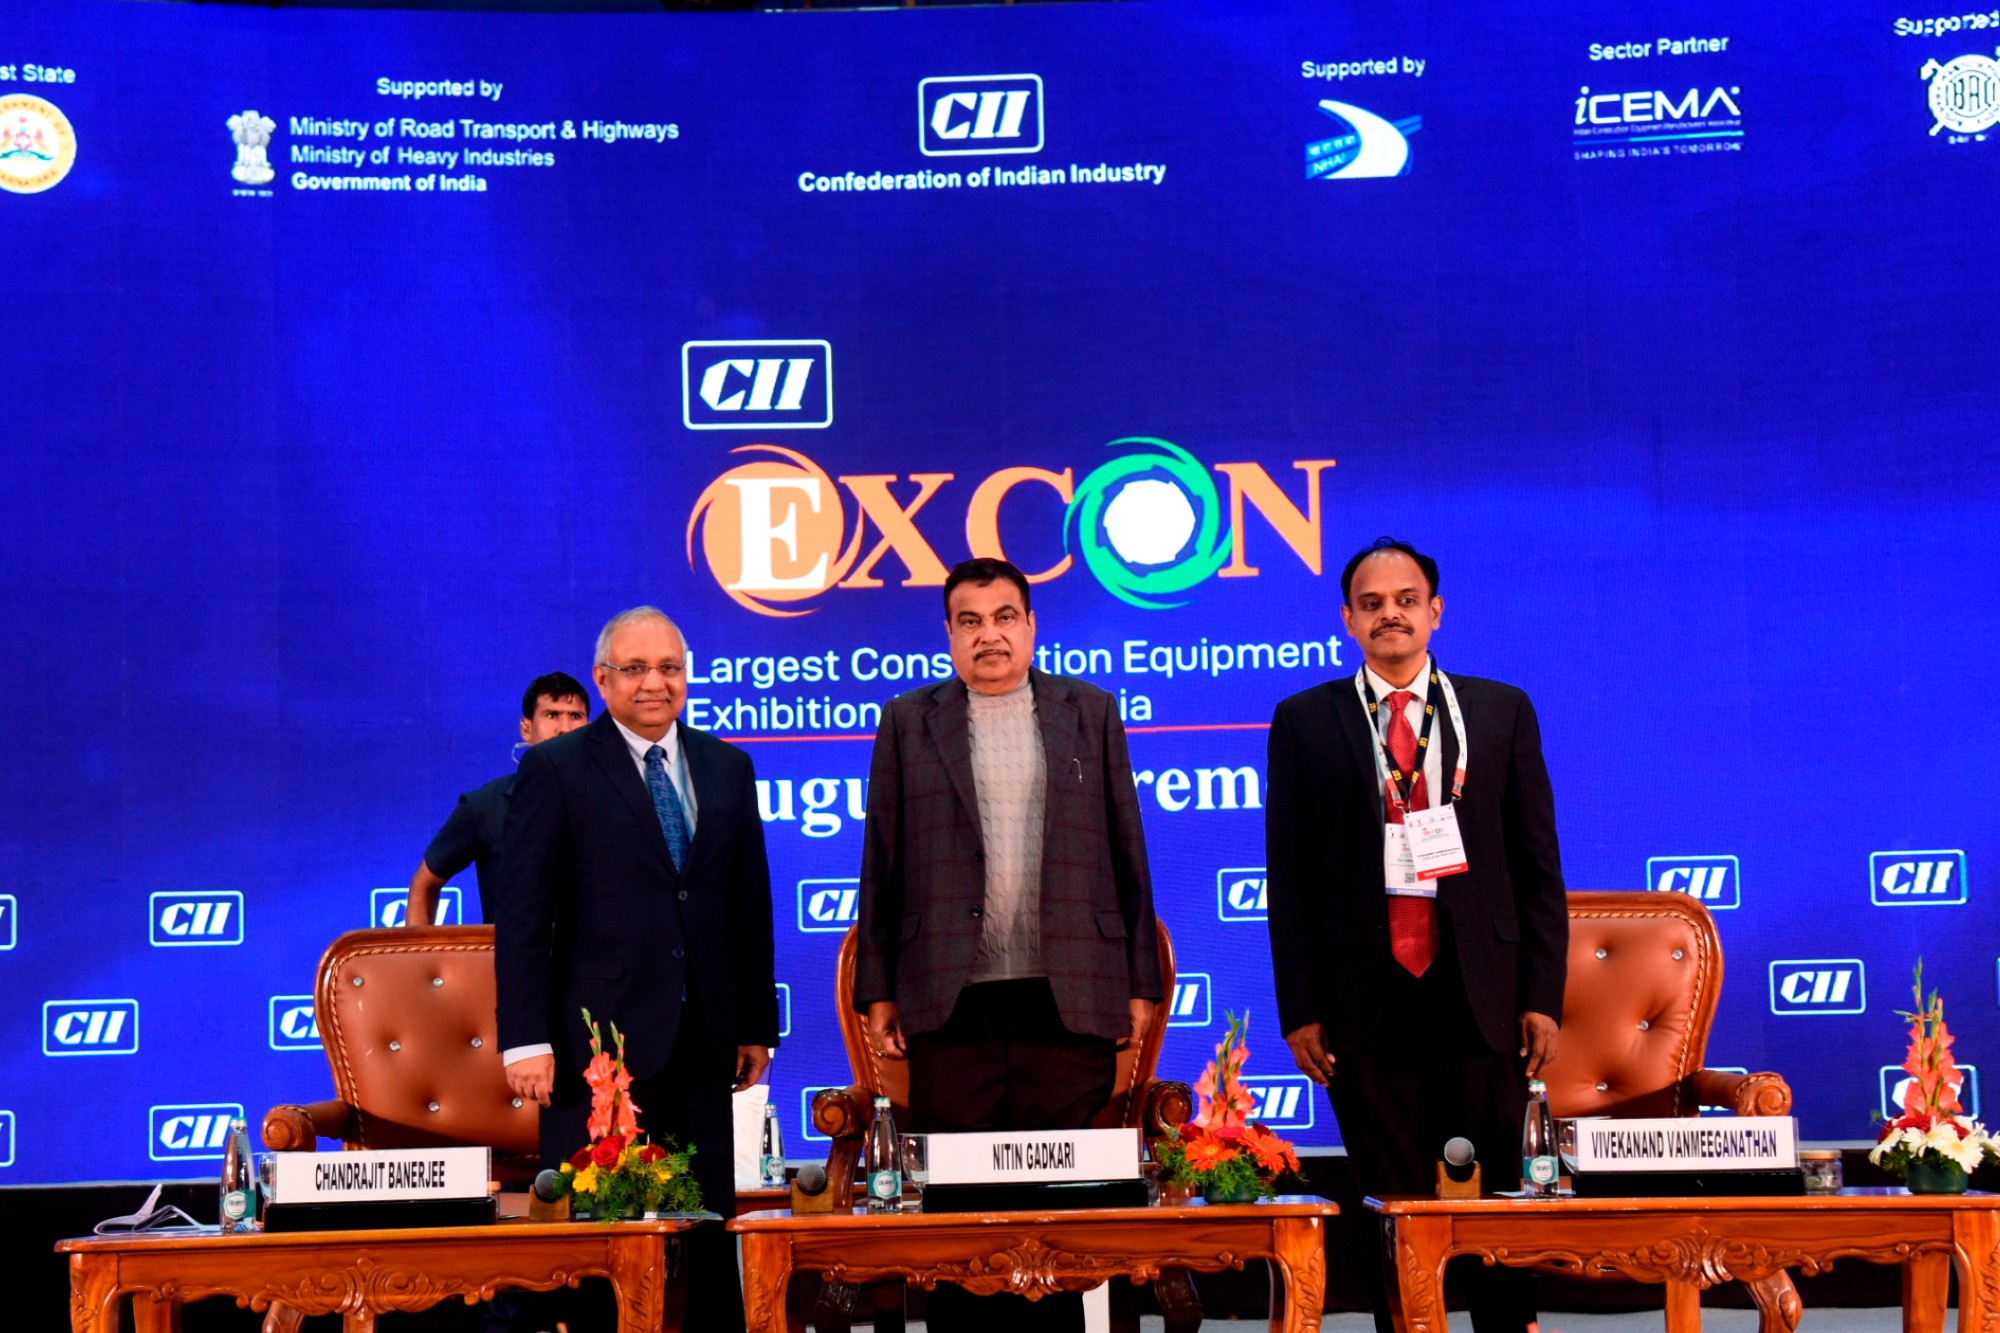 Nitin Gadkari envisions India as the Global Leader by 2028